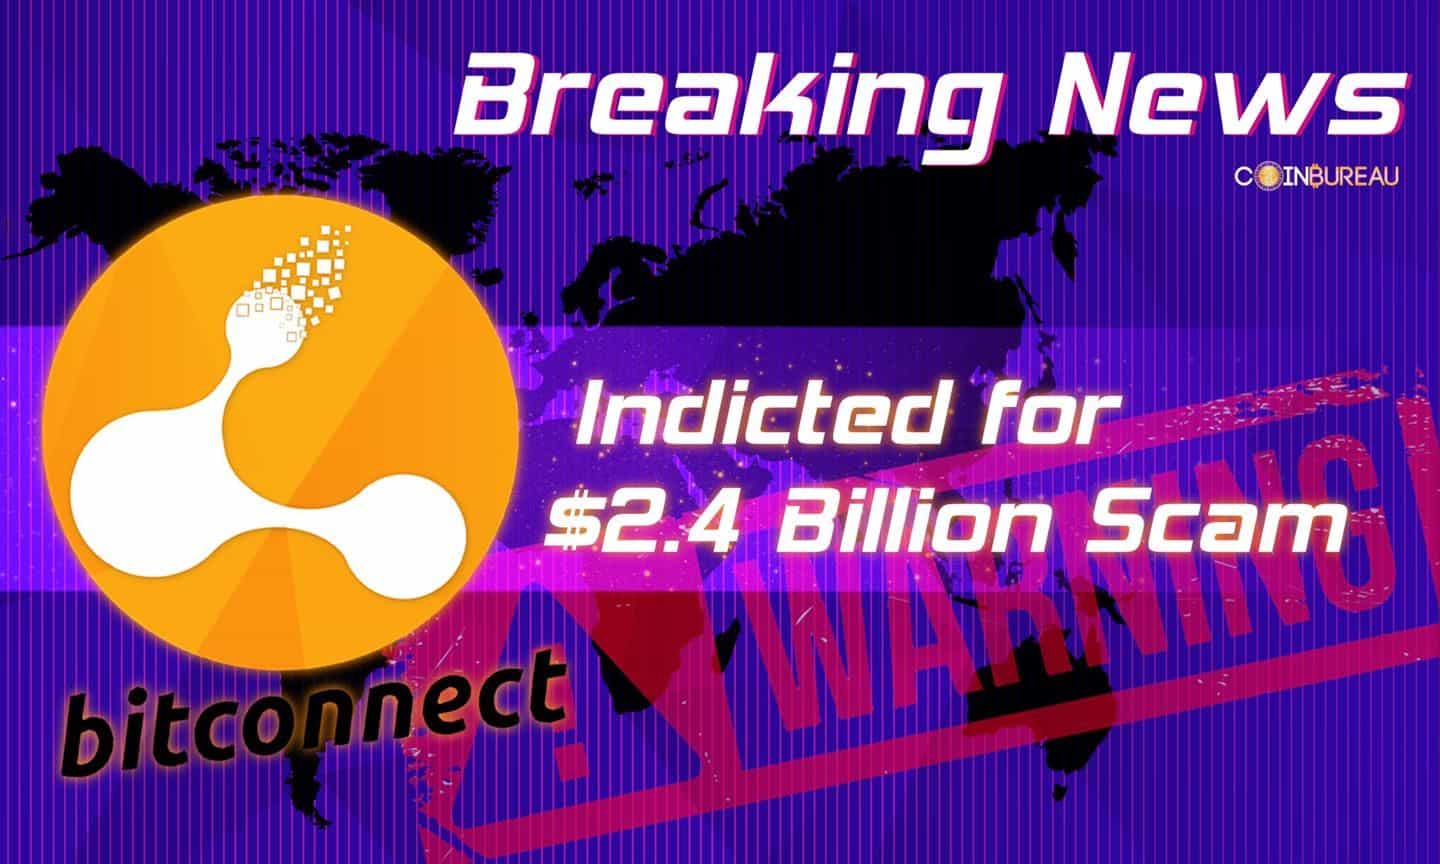 BitConnect Mastermind Indicted for $2.4 Billion Scam - But Authorities Can’t Find Him